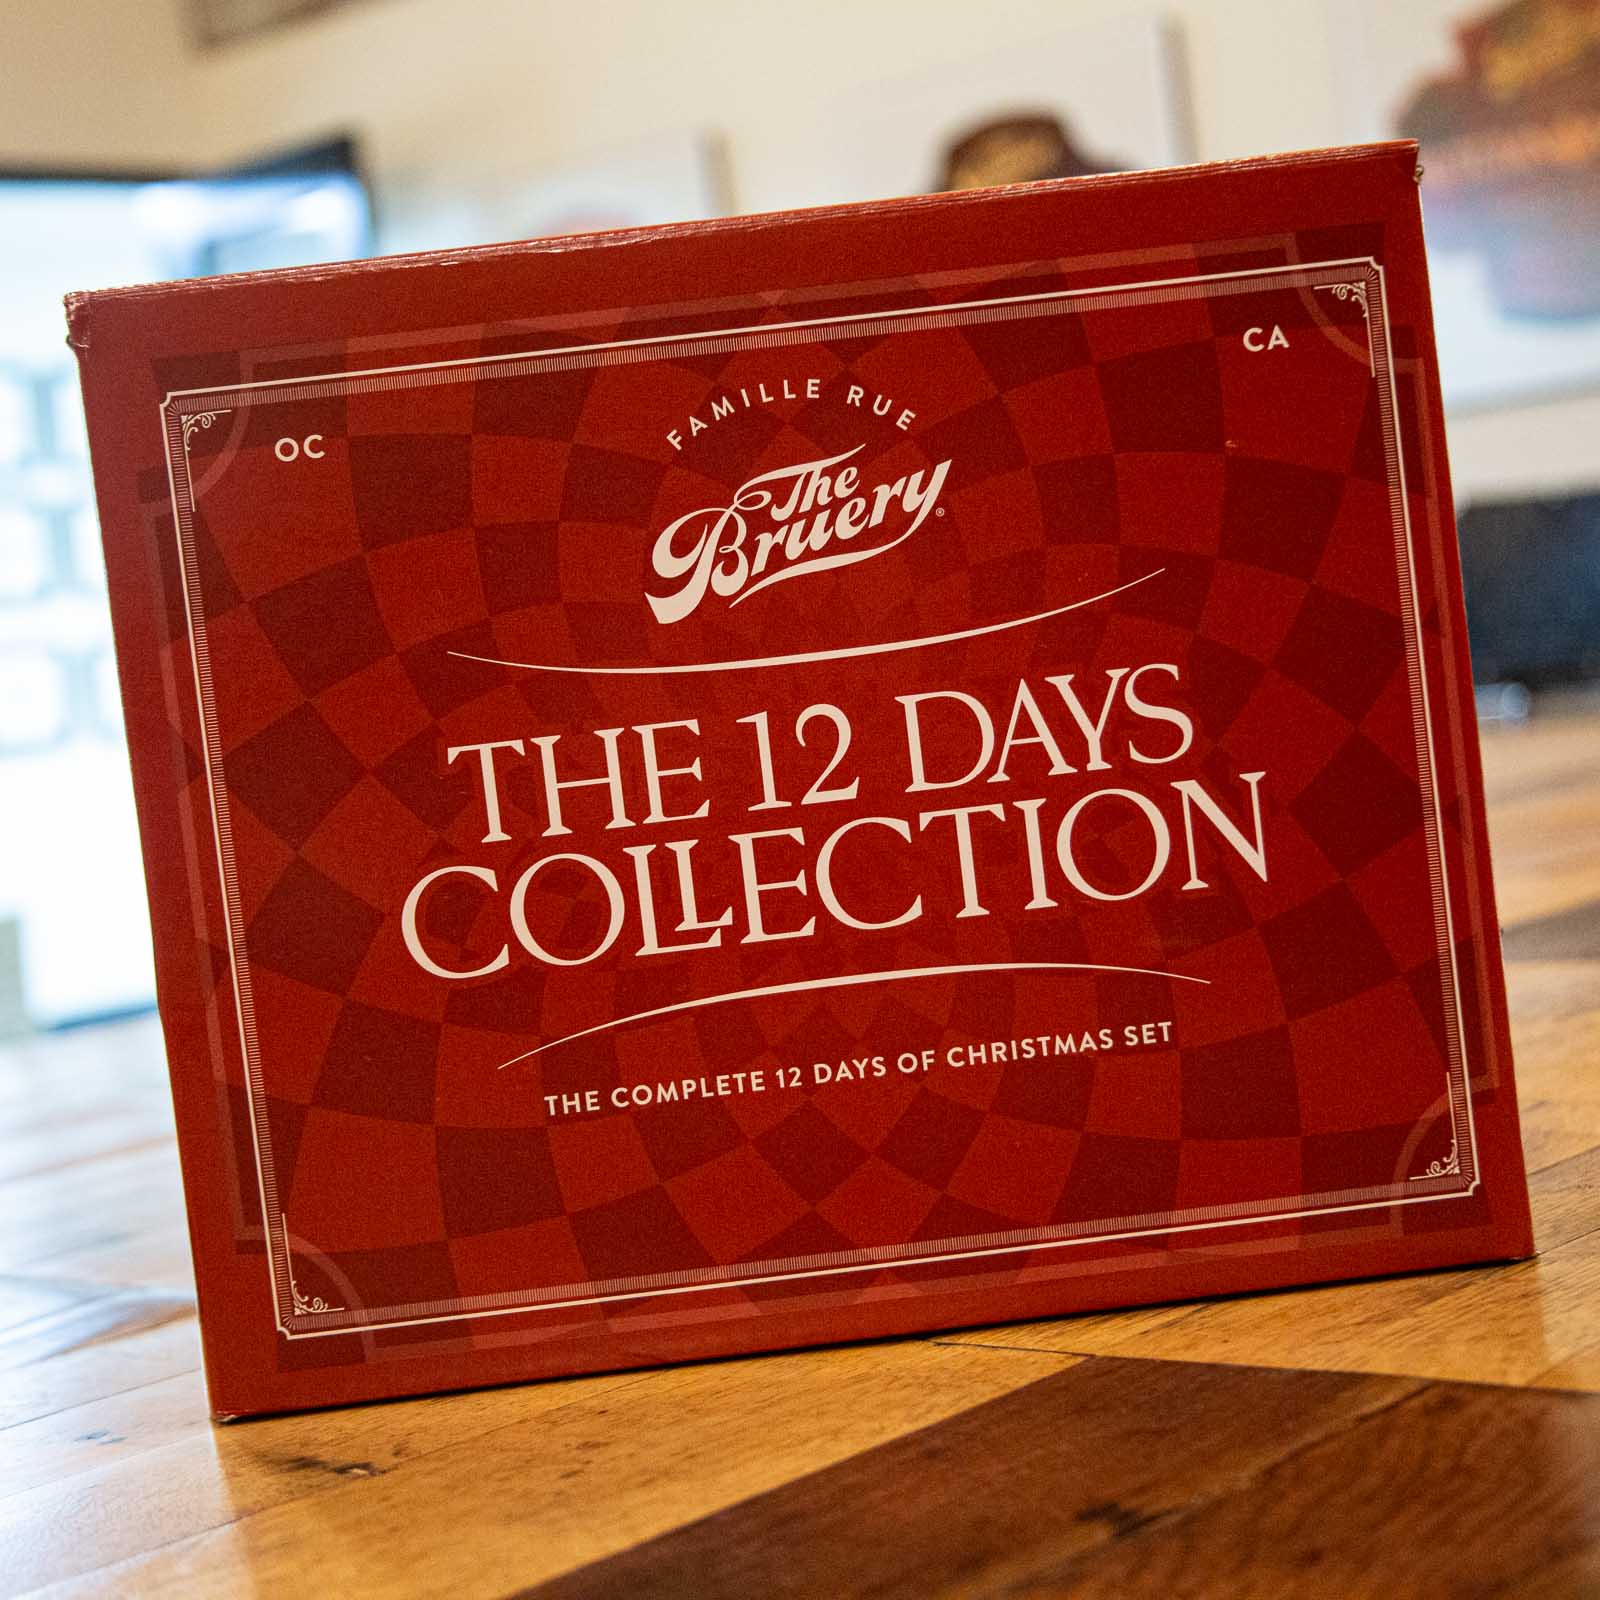 Pictured: The 12 Days Collection Box